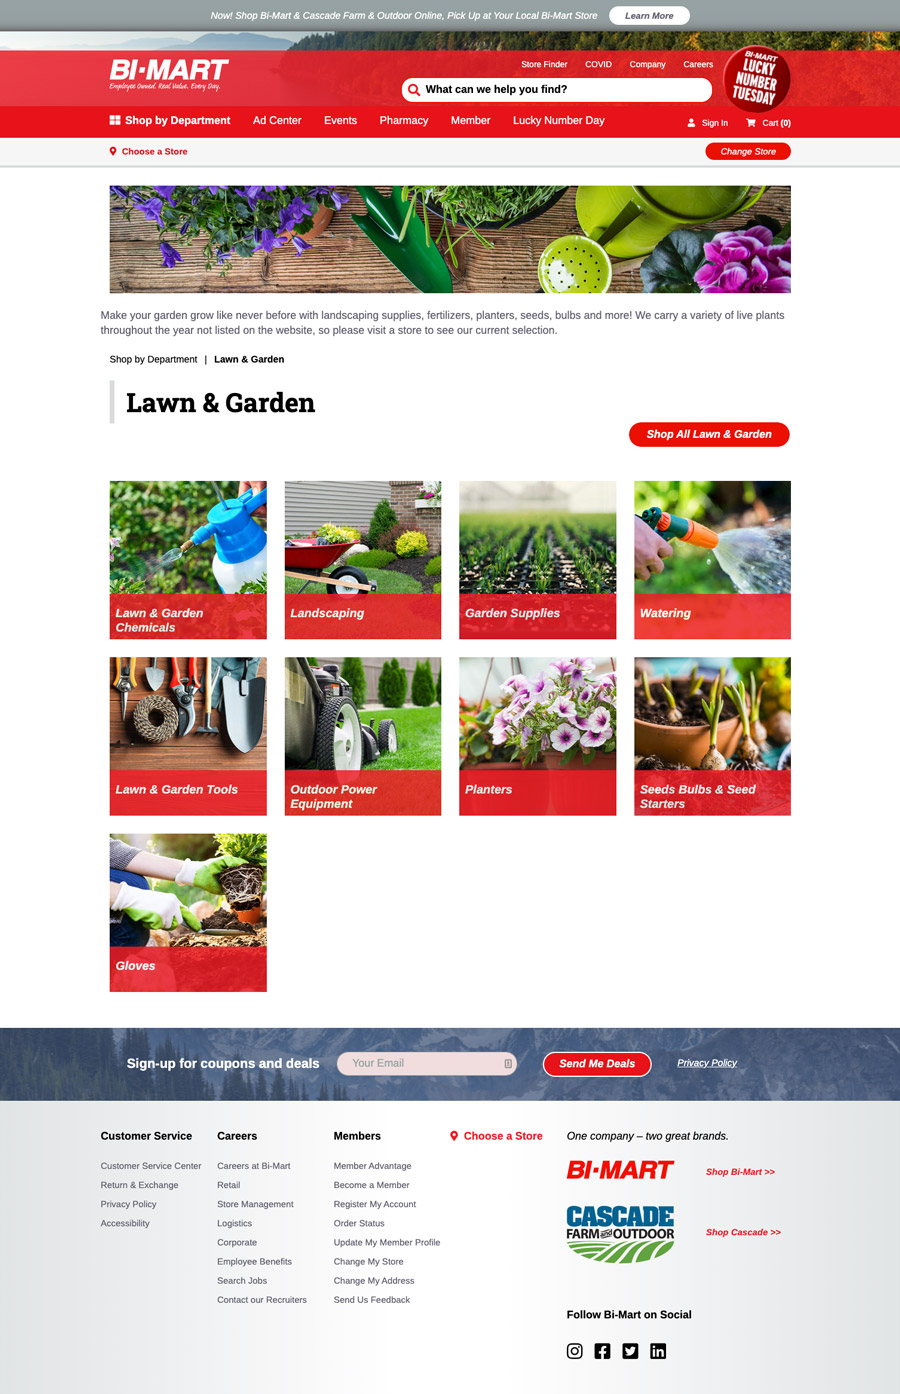 Lawn and Garden department landing page on bimart.com